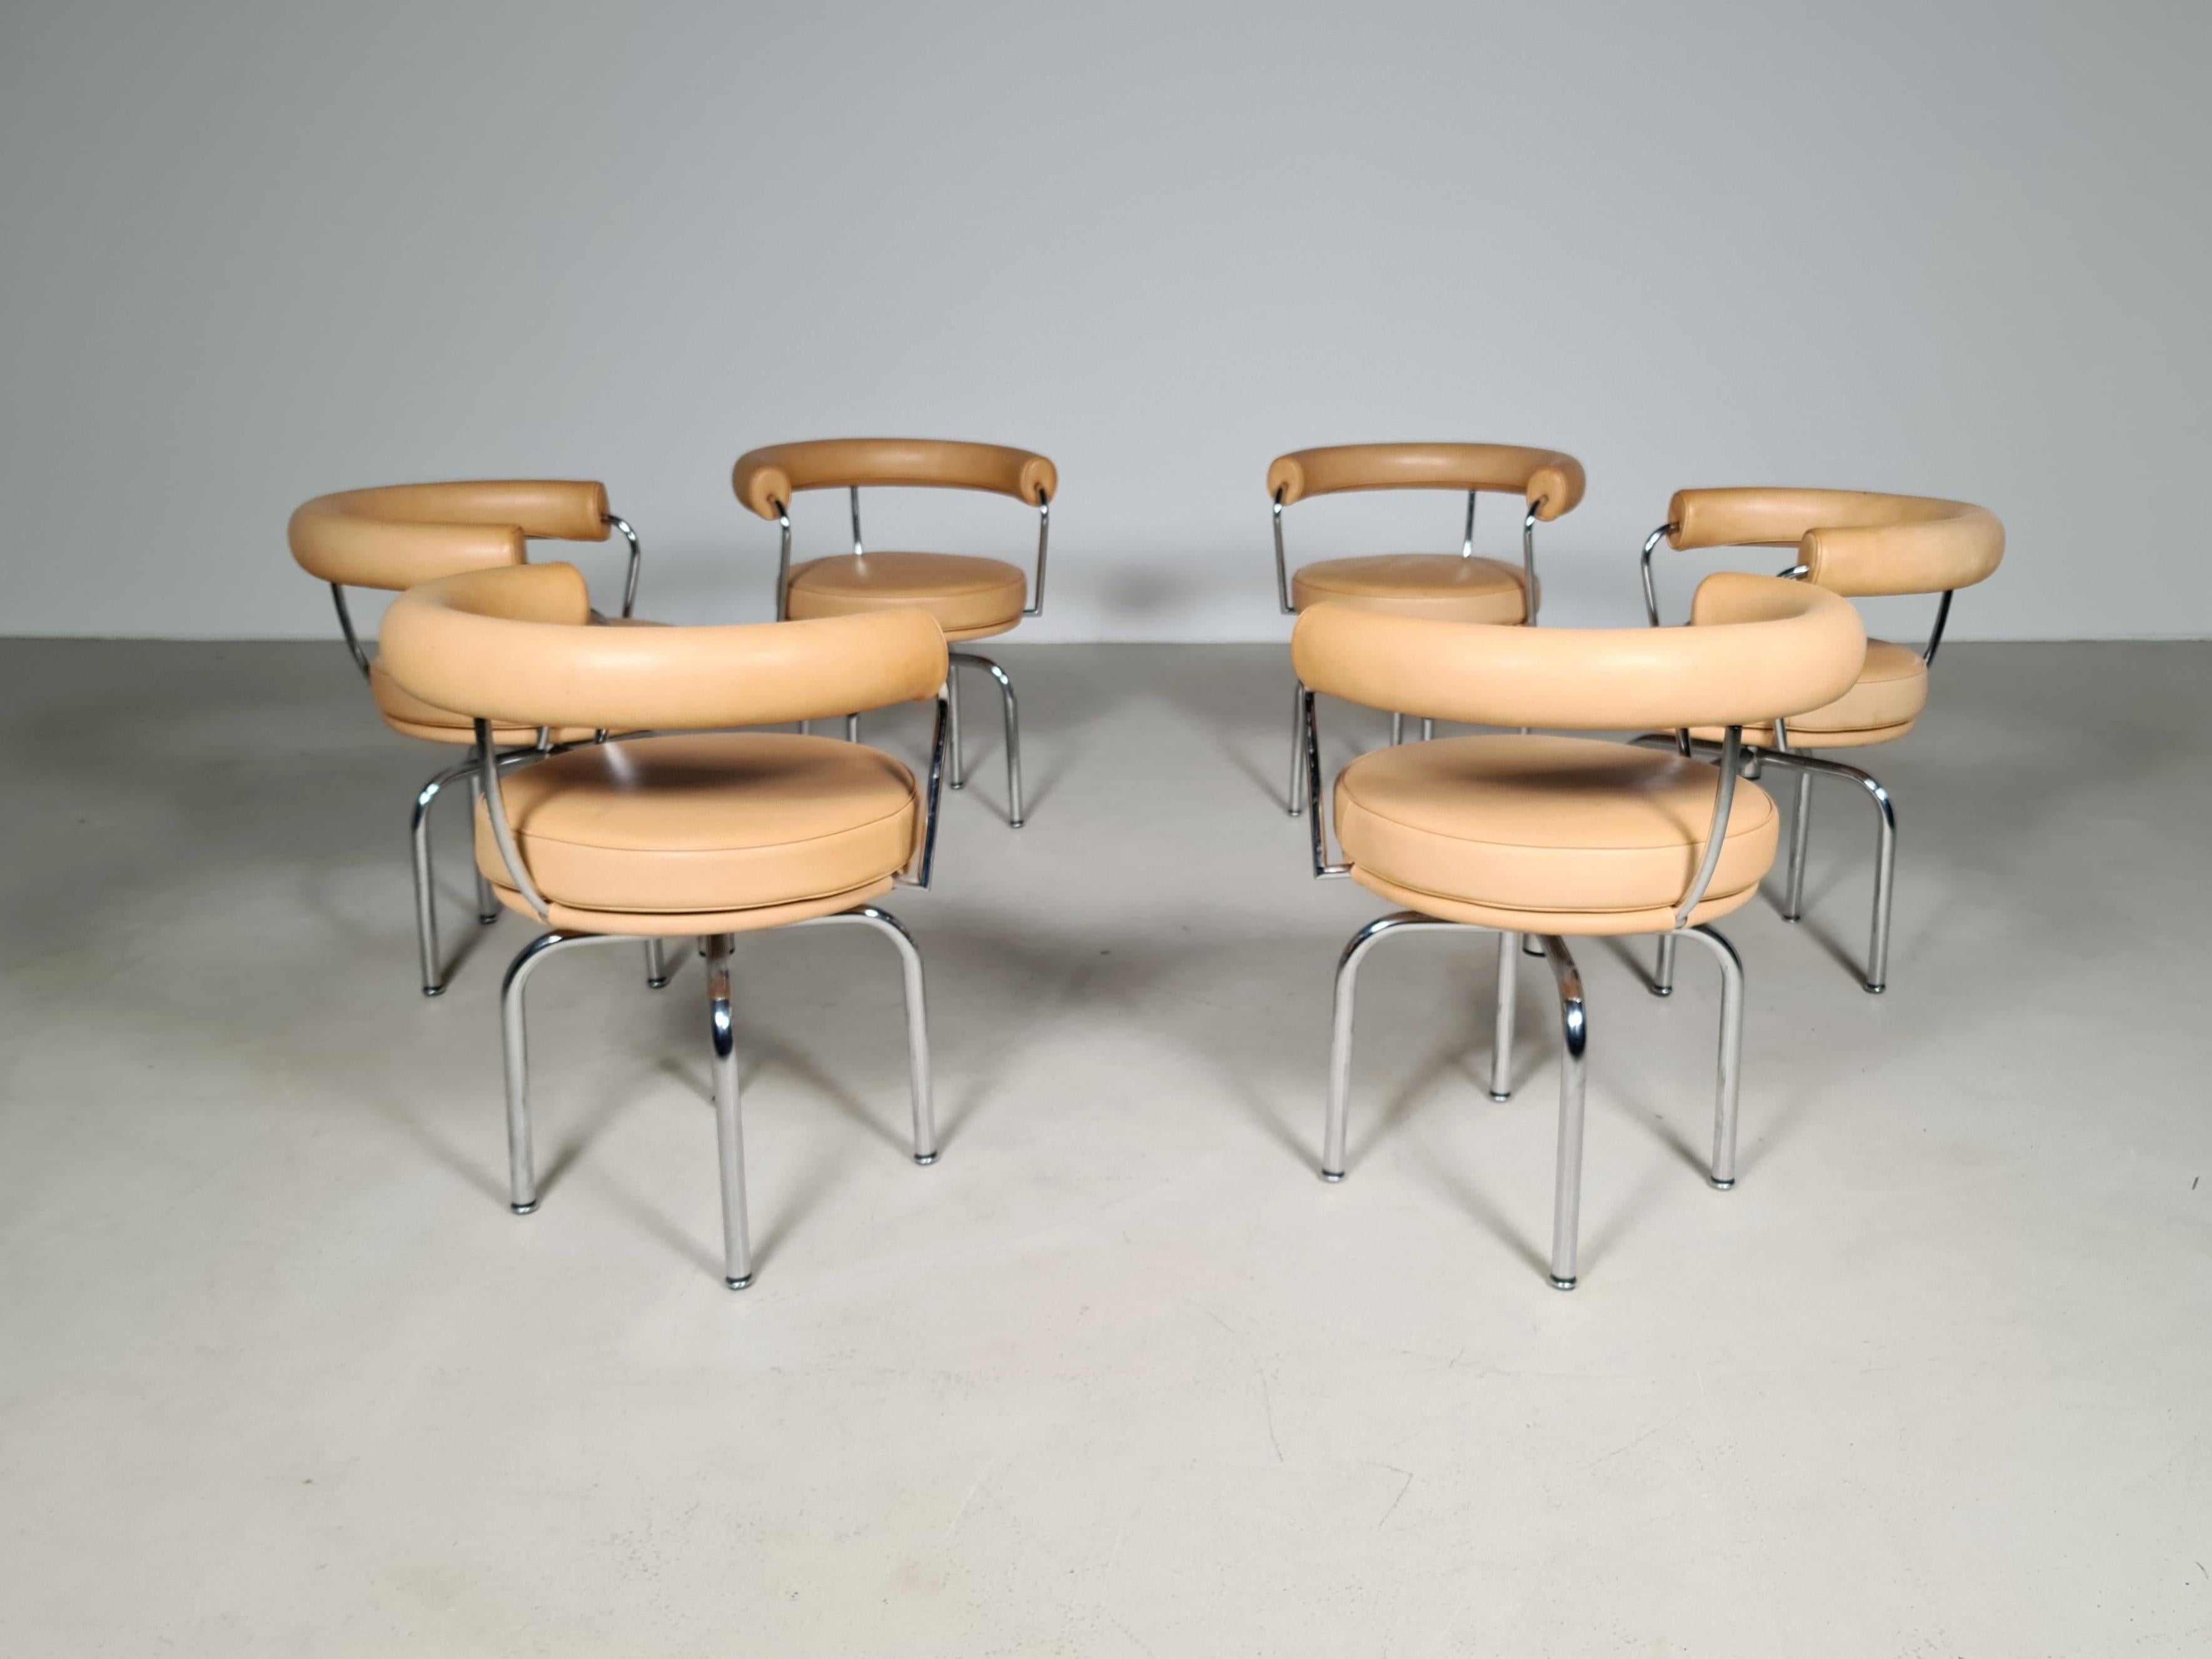 20th Century Set of 6 Lc7 Swivel Chairs by Charlotte Perriand for Cassina, 1990s